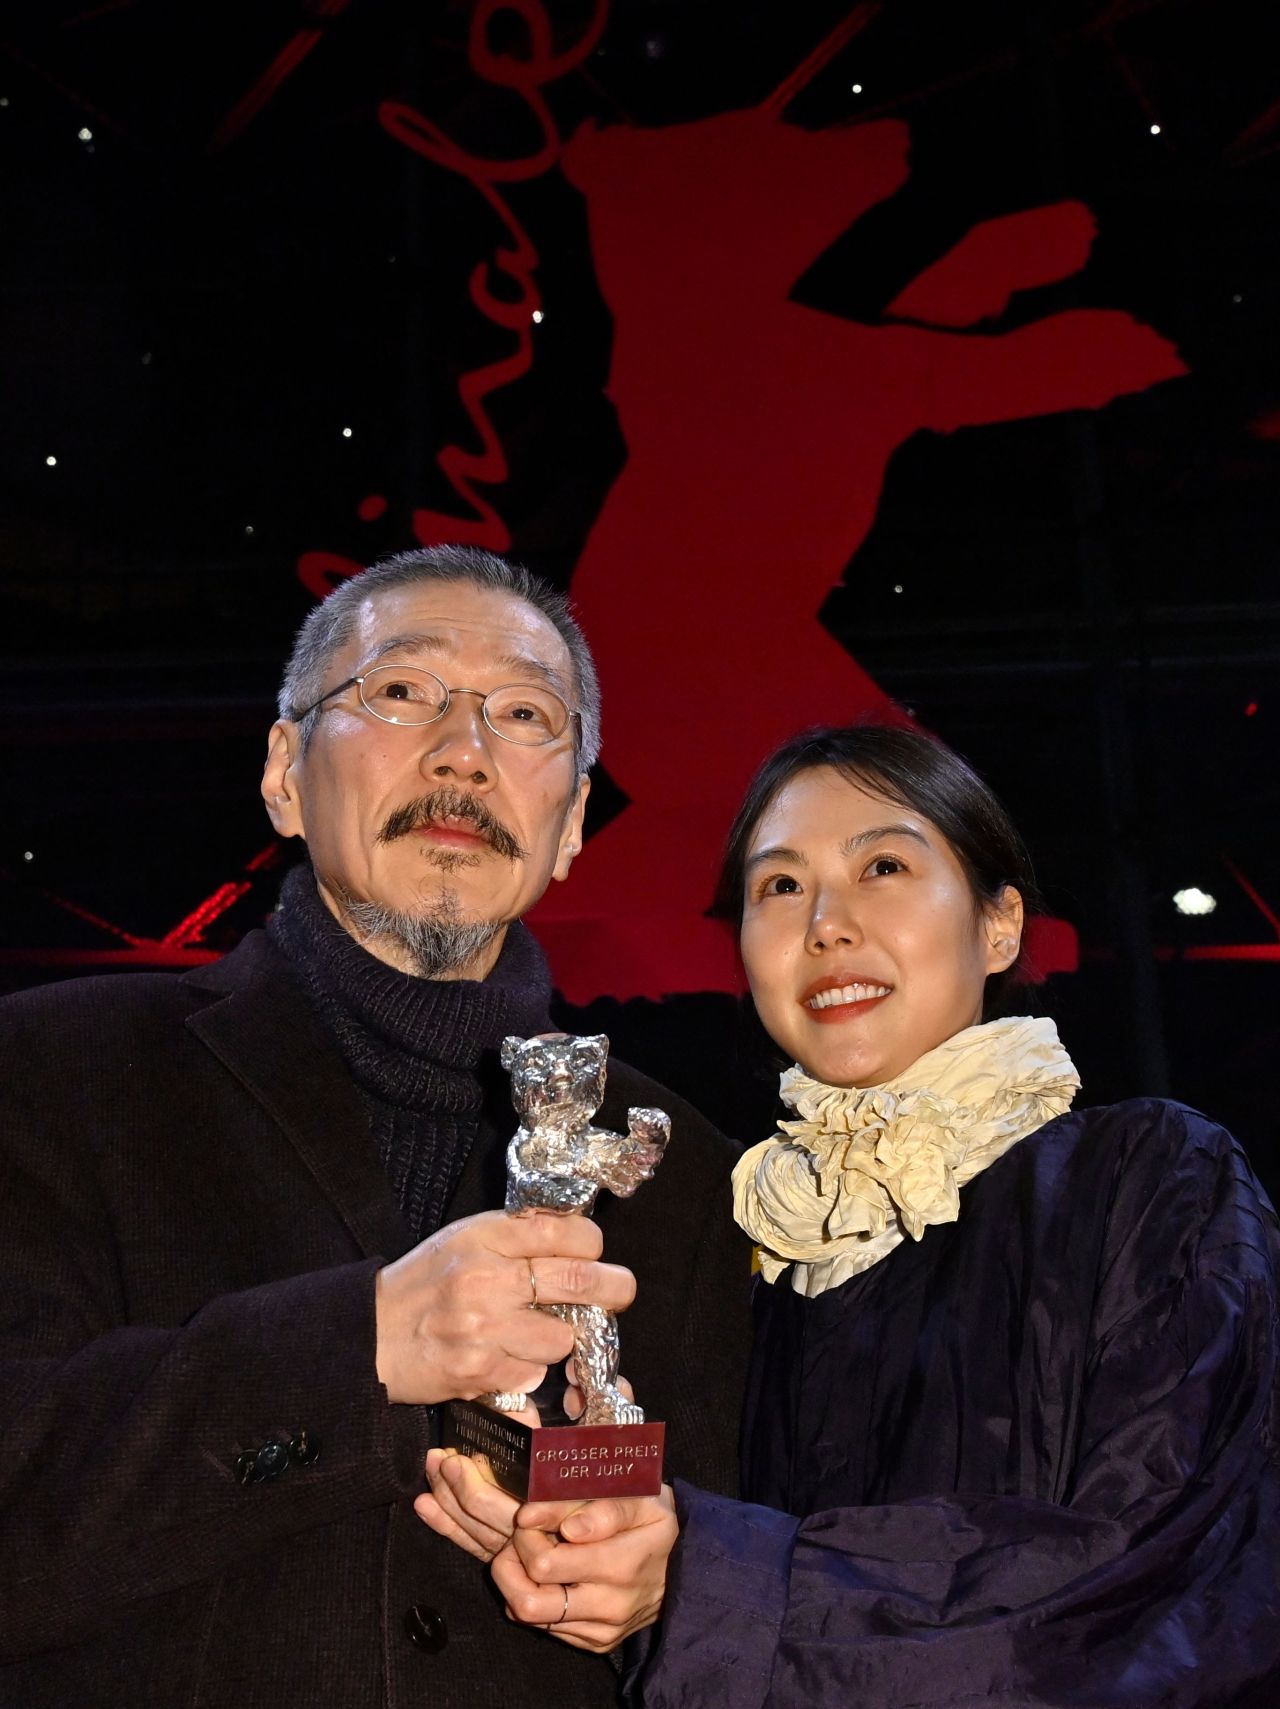 Korean director Hong Sang-soo and actor Kim Min-hee pose on the red carpet outside the Berlinale Palace with the Silver Bear award for the film “The Novelist’s Film,” after the awards ceremony of the 72nd Berlinale Film Festival in Berlin on Thursday. (AFP-Yonhap)